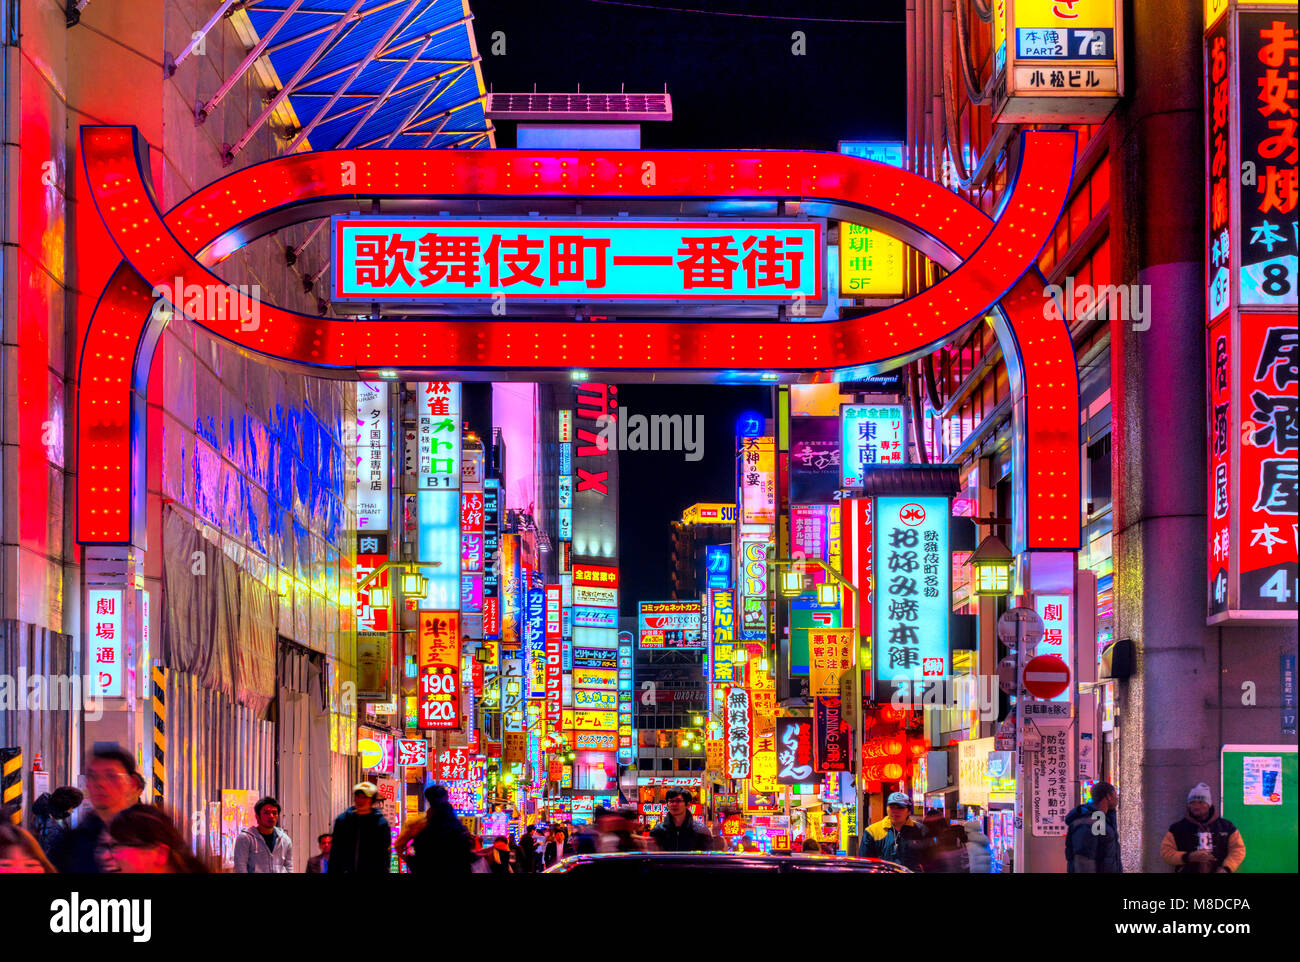 TOKYO - NOVEMBER 13: Billboards in Shinjuku's Kabuki-cho district November 13, 2014 in Tokyo, JP. The area is a nightlife district known as Sleepless  Stock Photo